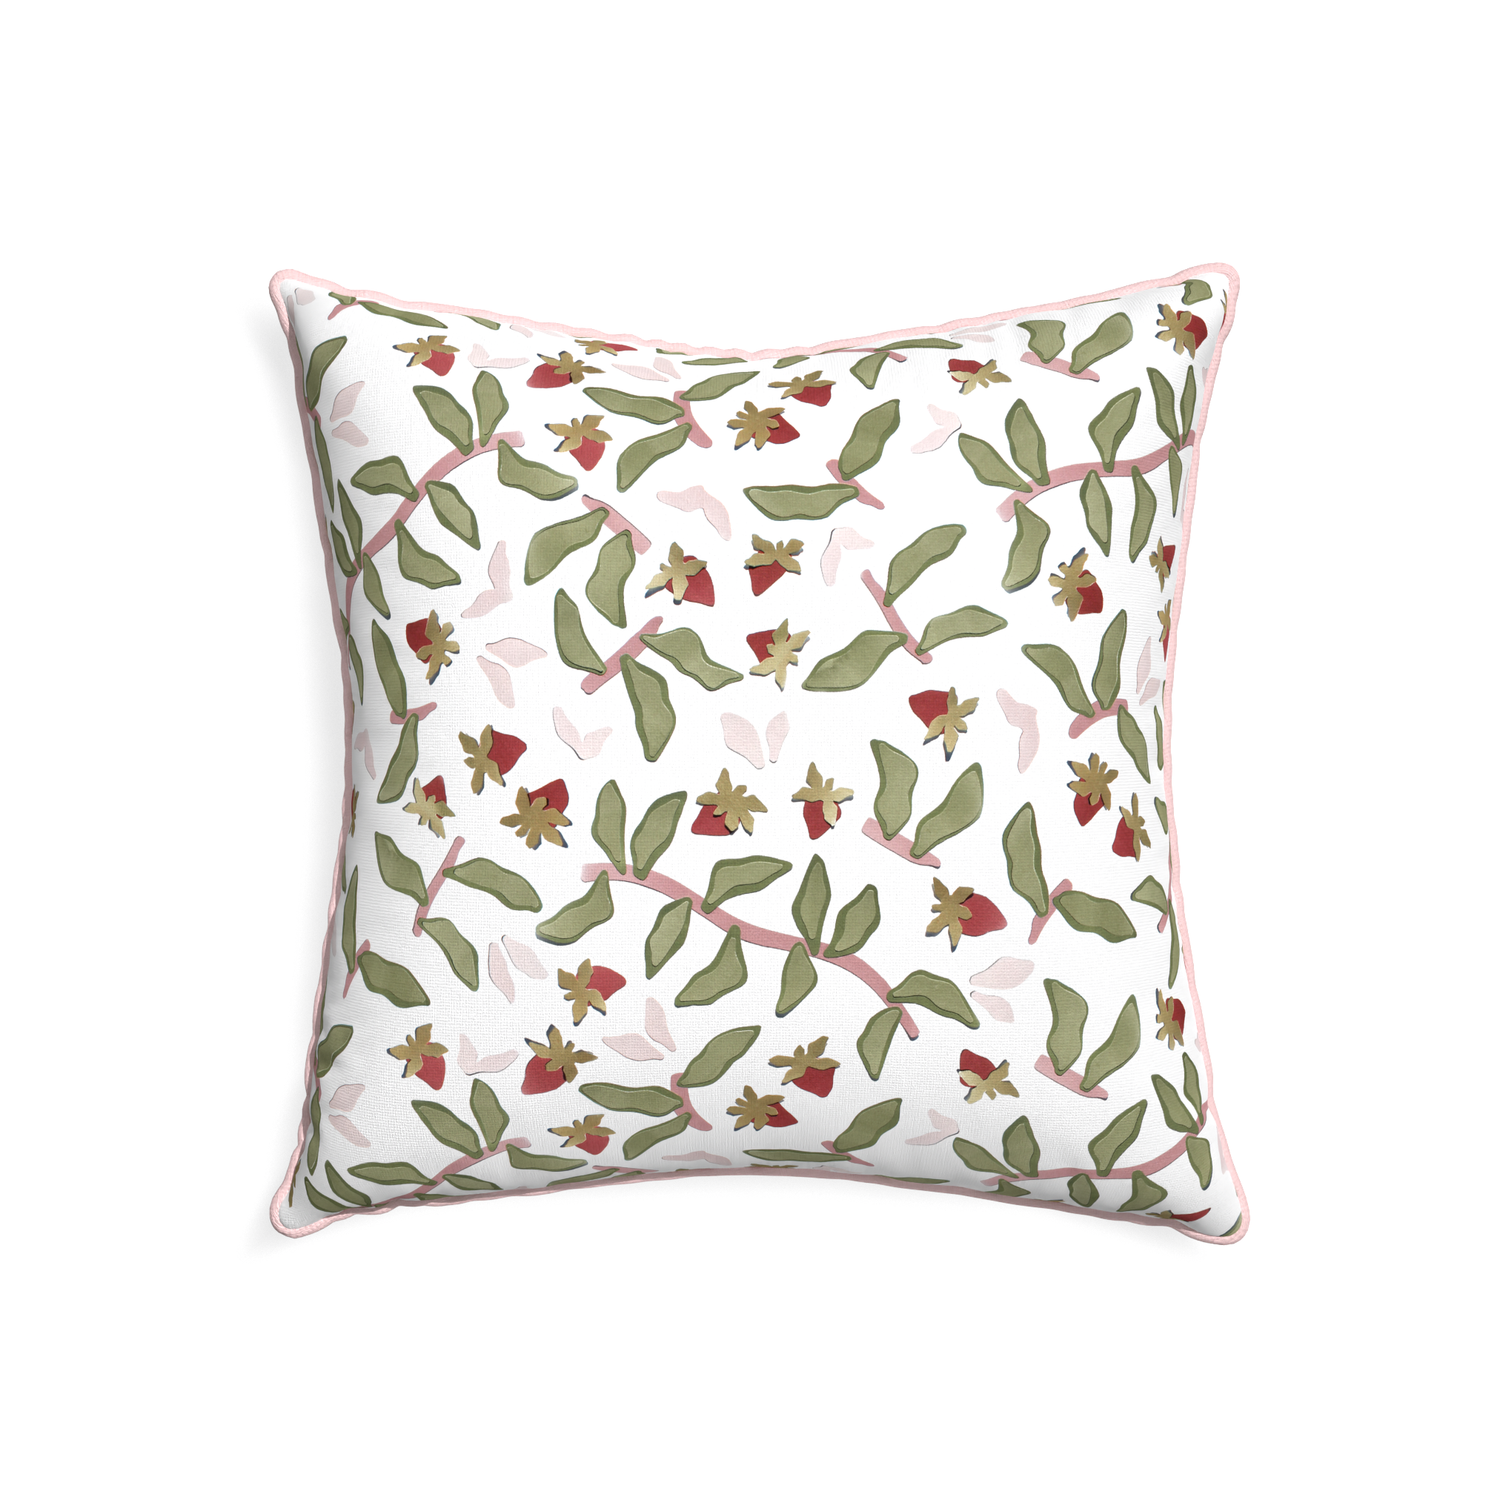 22-square nellie custom strawberry & botanicalpillow with petal piping on white background